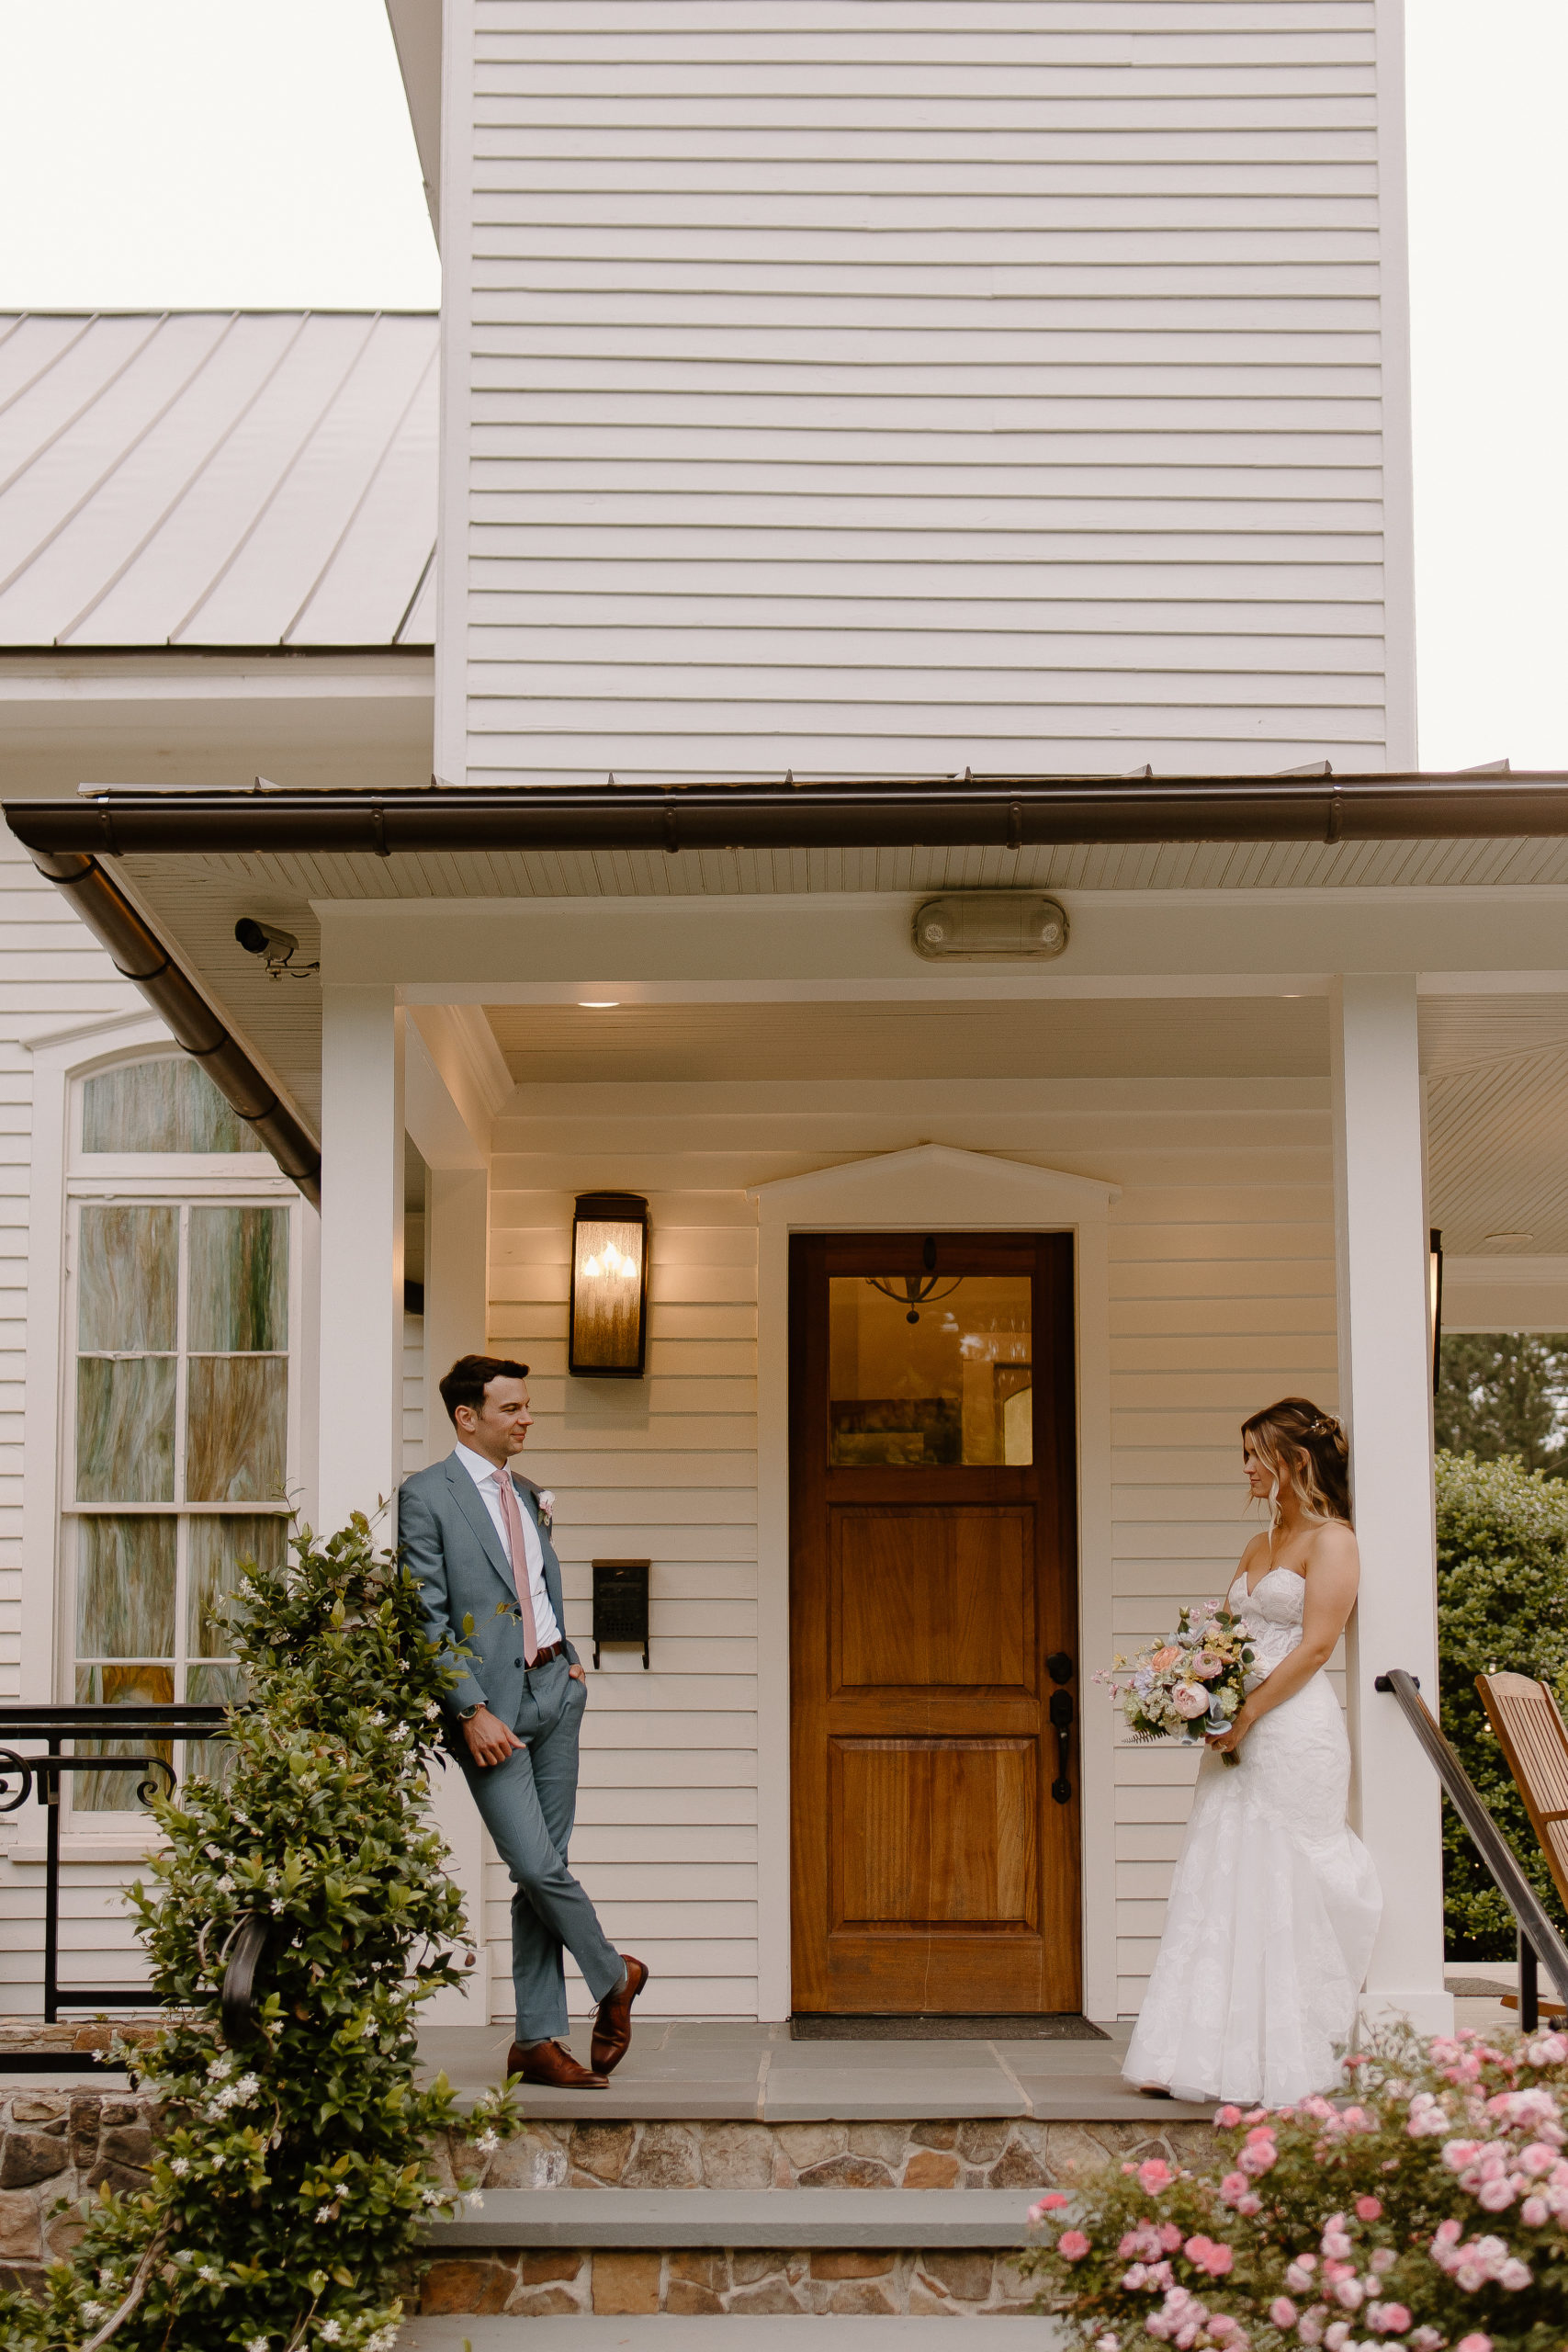 Intimate wedding at The Parlour at Manns Chapel in Chapel Hill North Carolina